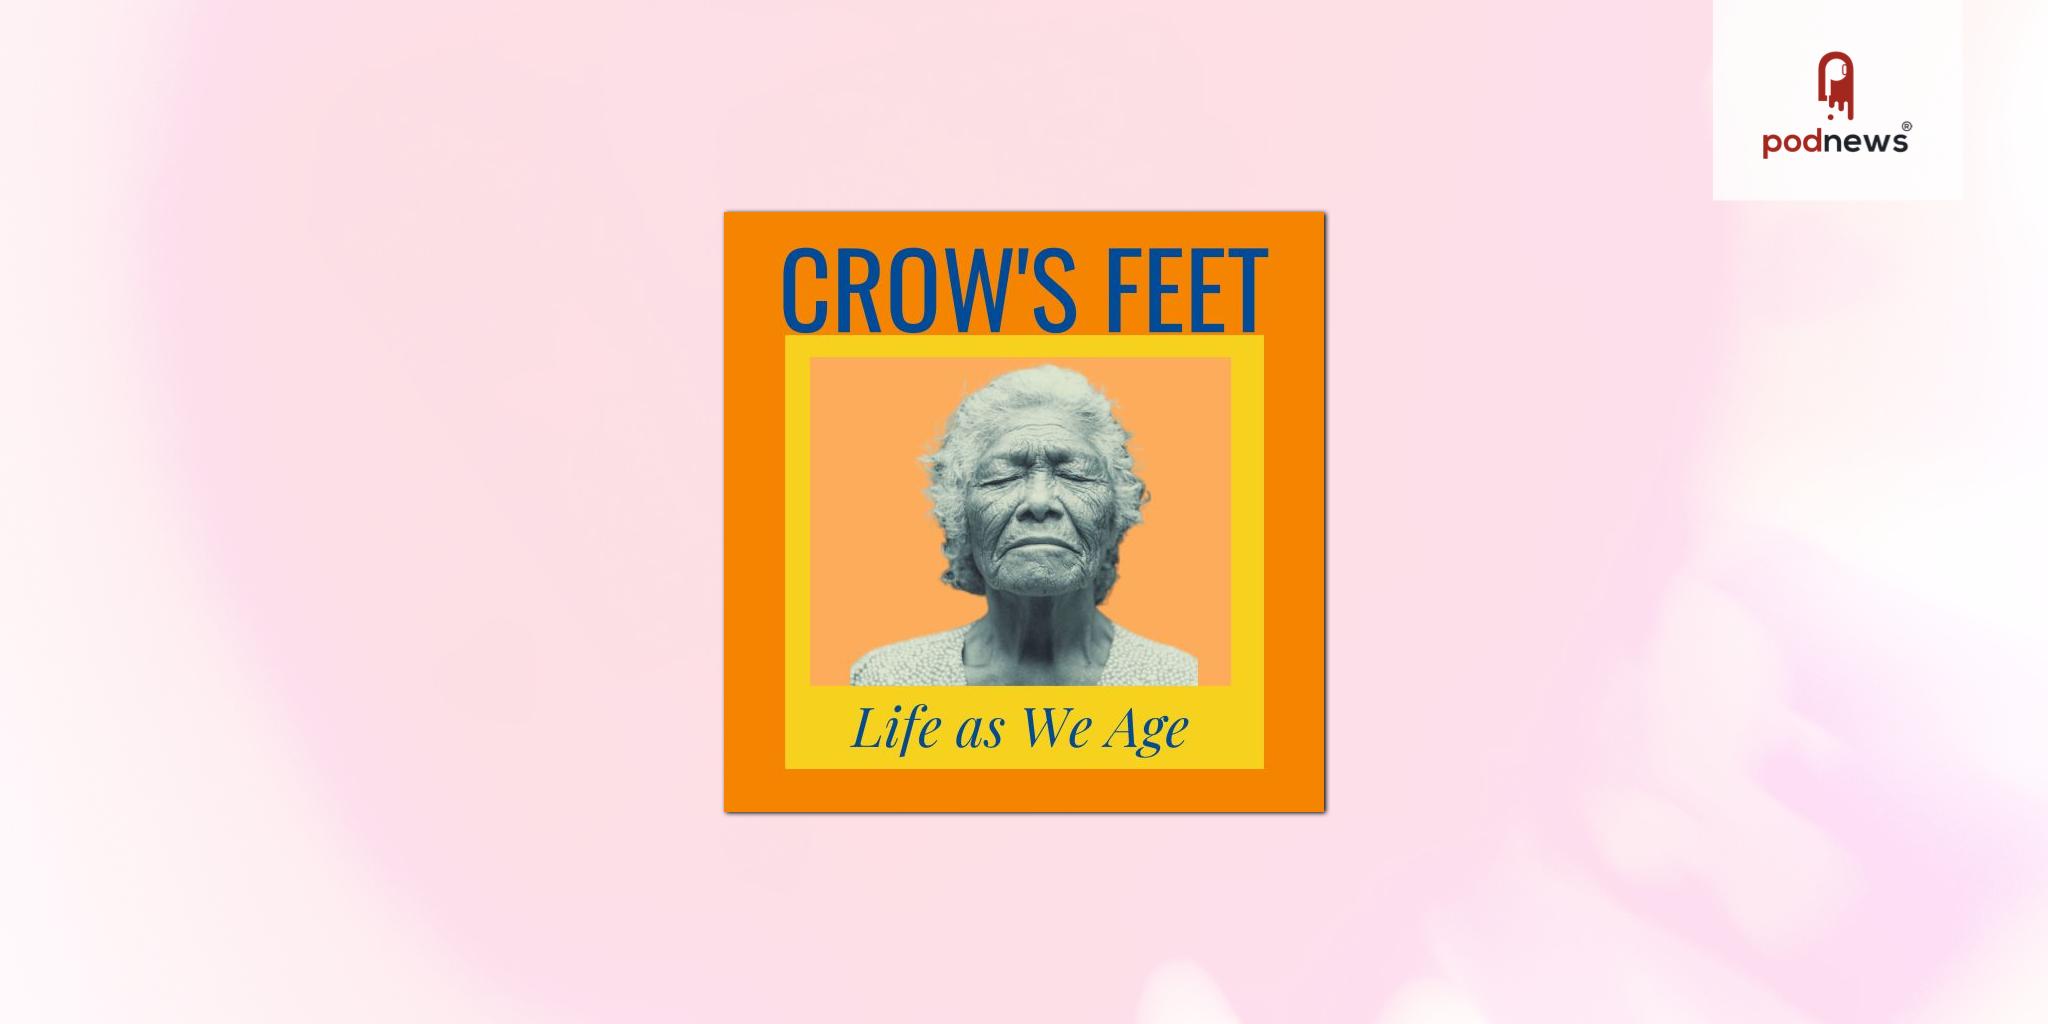 New Podcast will make you glad you have crow's feet